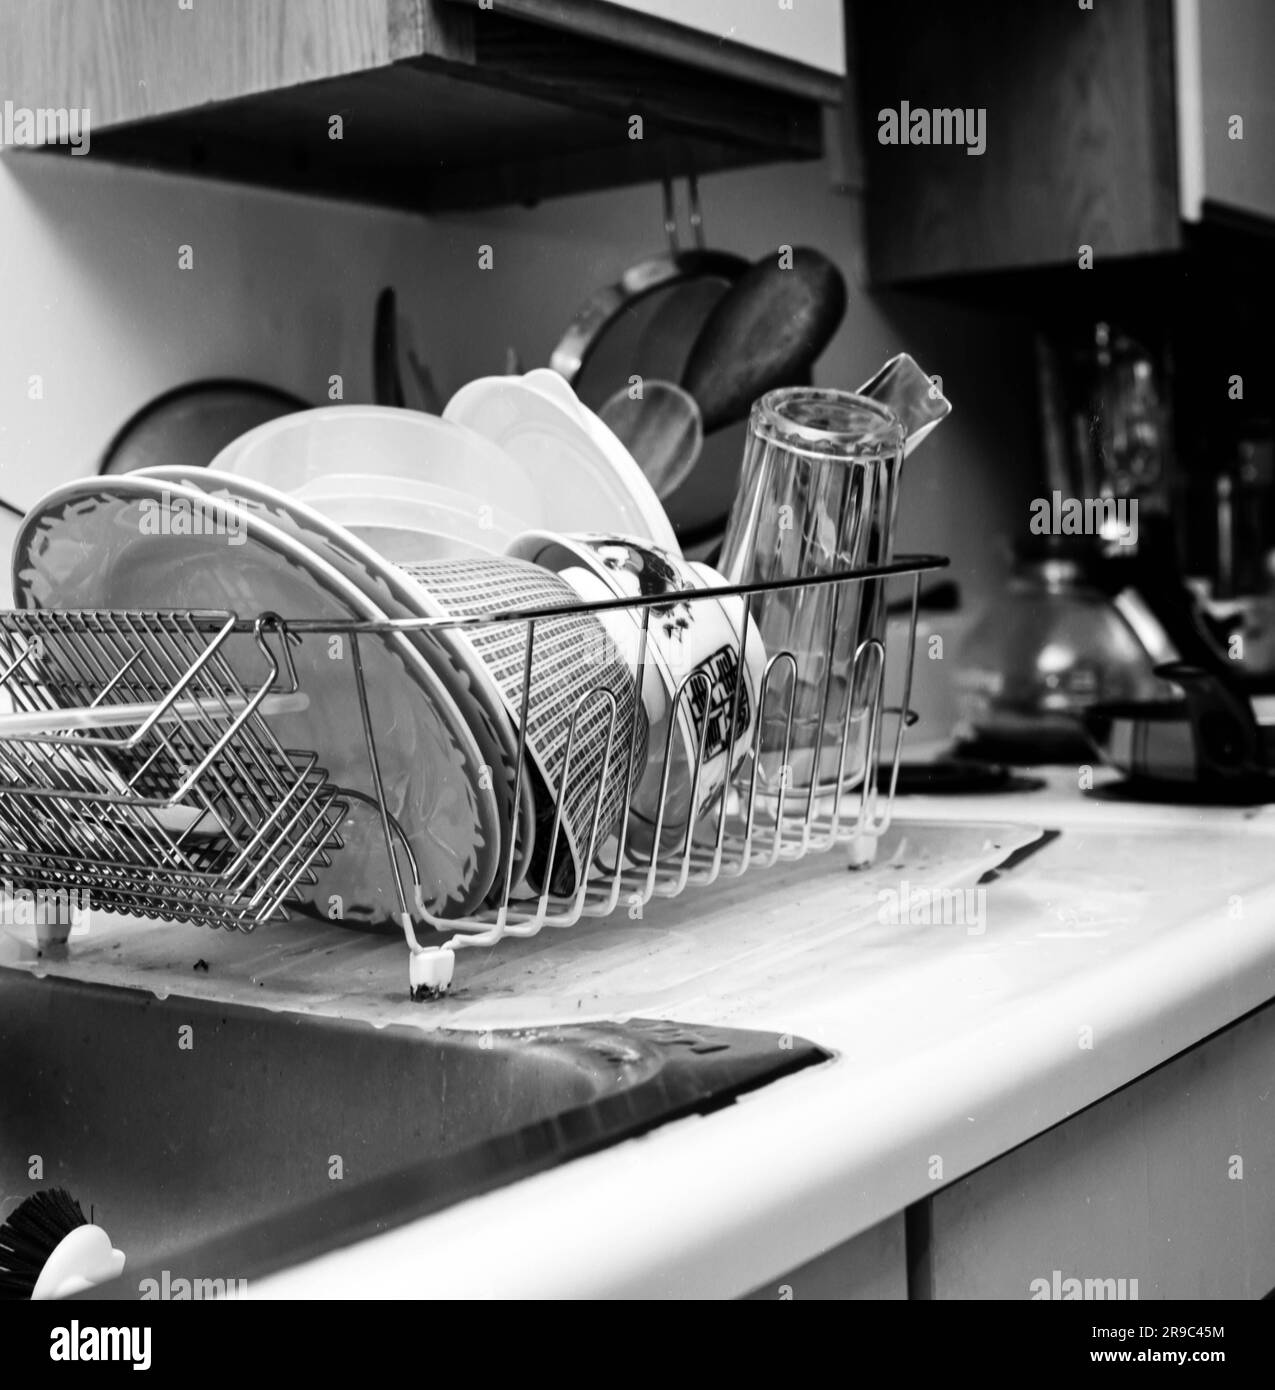 https://c8.alamy.com/comp/2R9C45M/black-and-white-kitchen-details-taken-with-a-hasselblad-with-80mm-planar-lens-sink-ad-dish-draining-rack-2R9C45M.jpg